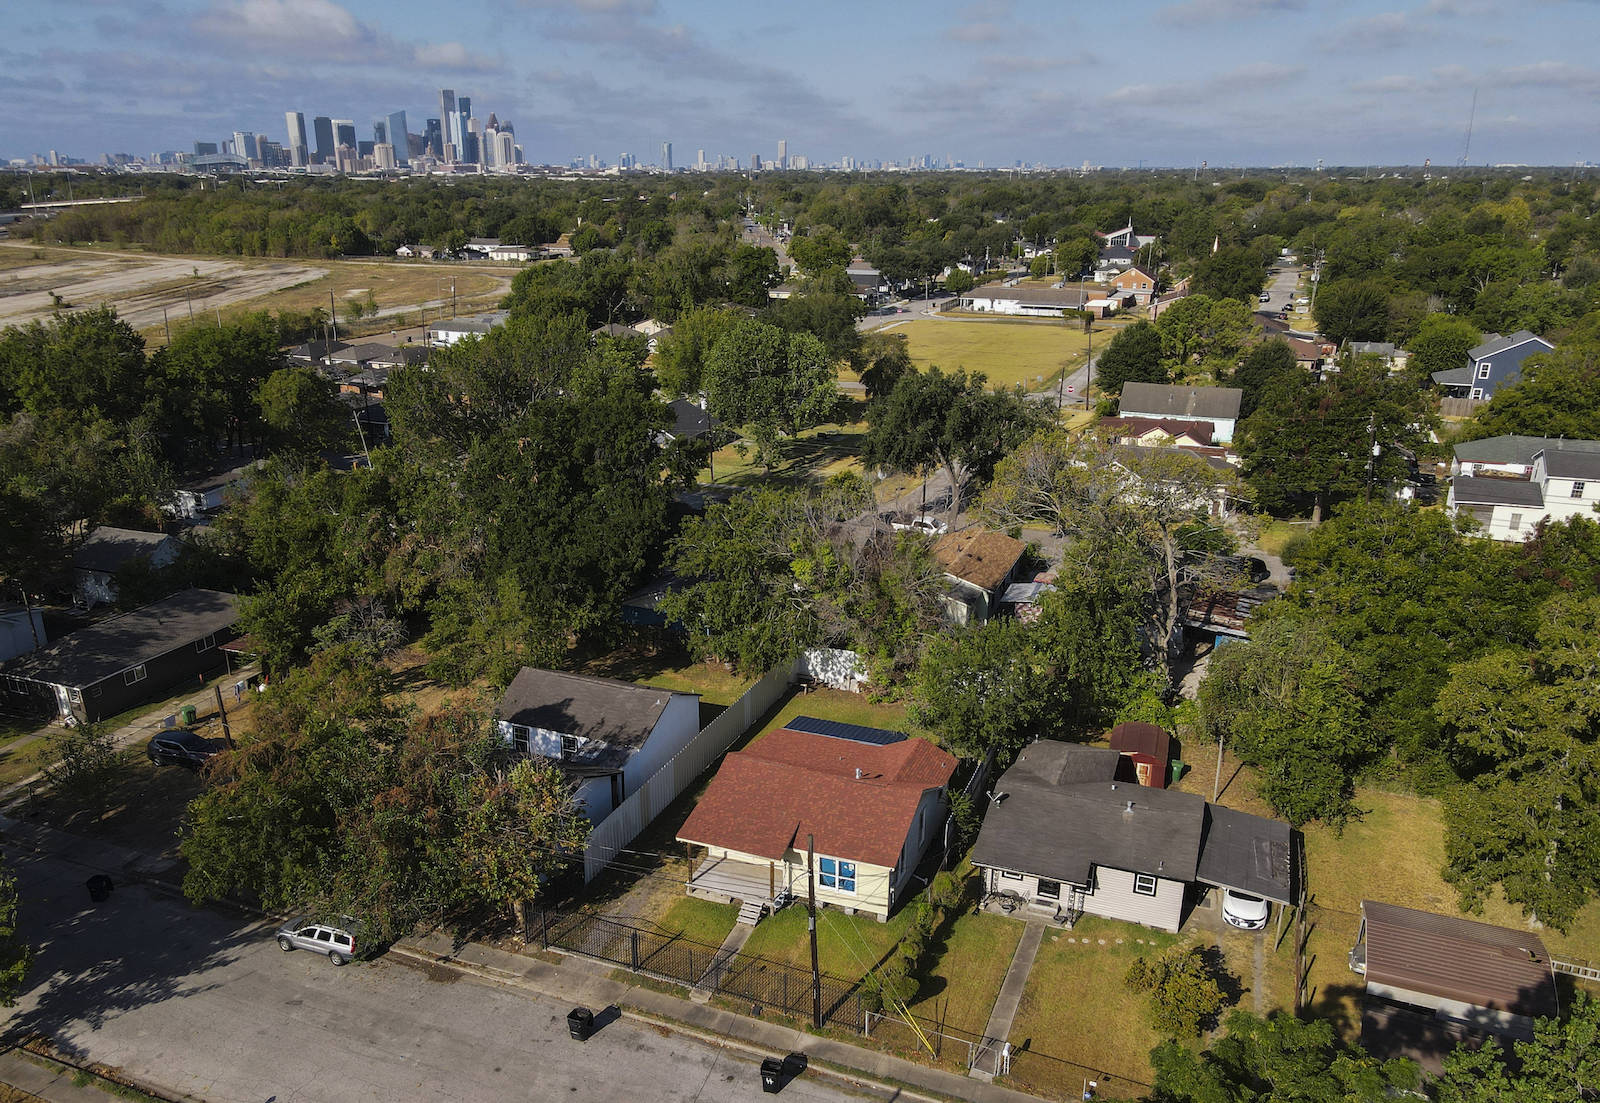 An aerial view of houses with downtown Houston in the distance